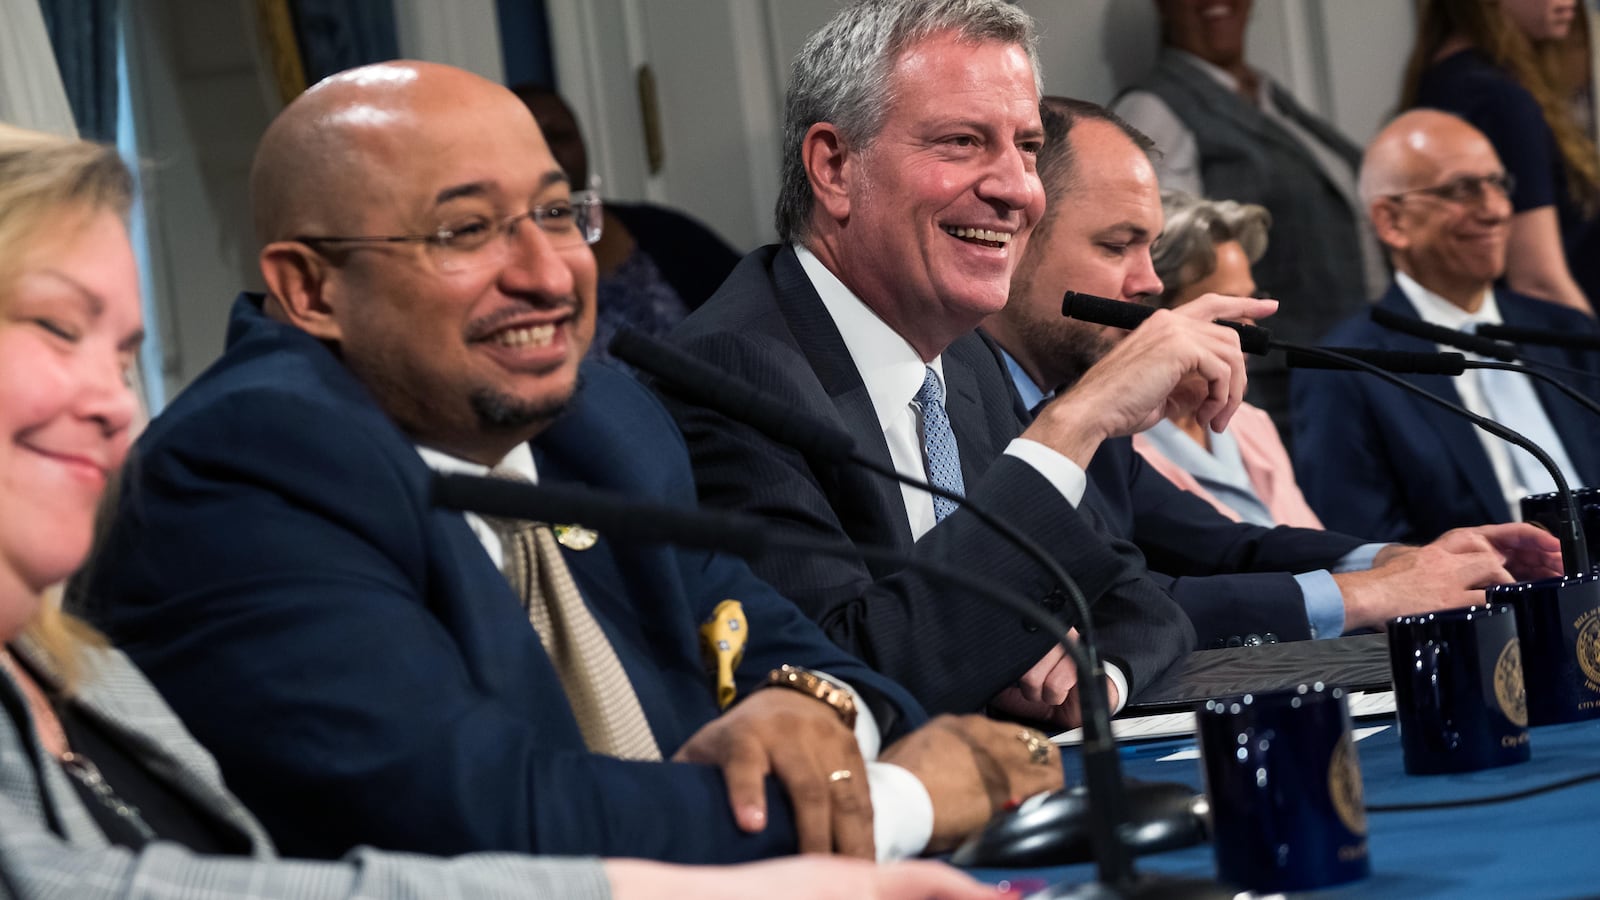 Labor leaders and Mayor Bill de Blasio on Tuesday announced a deal to boost pay for some pre-K teachers.